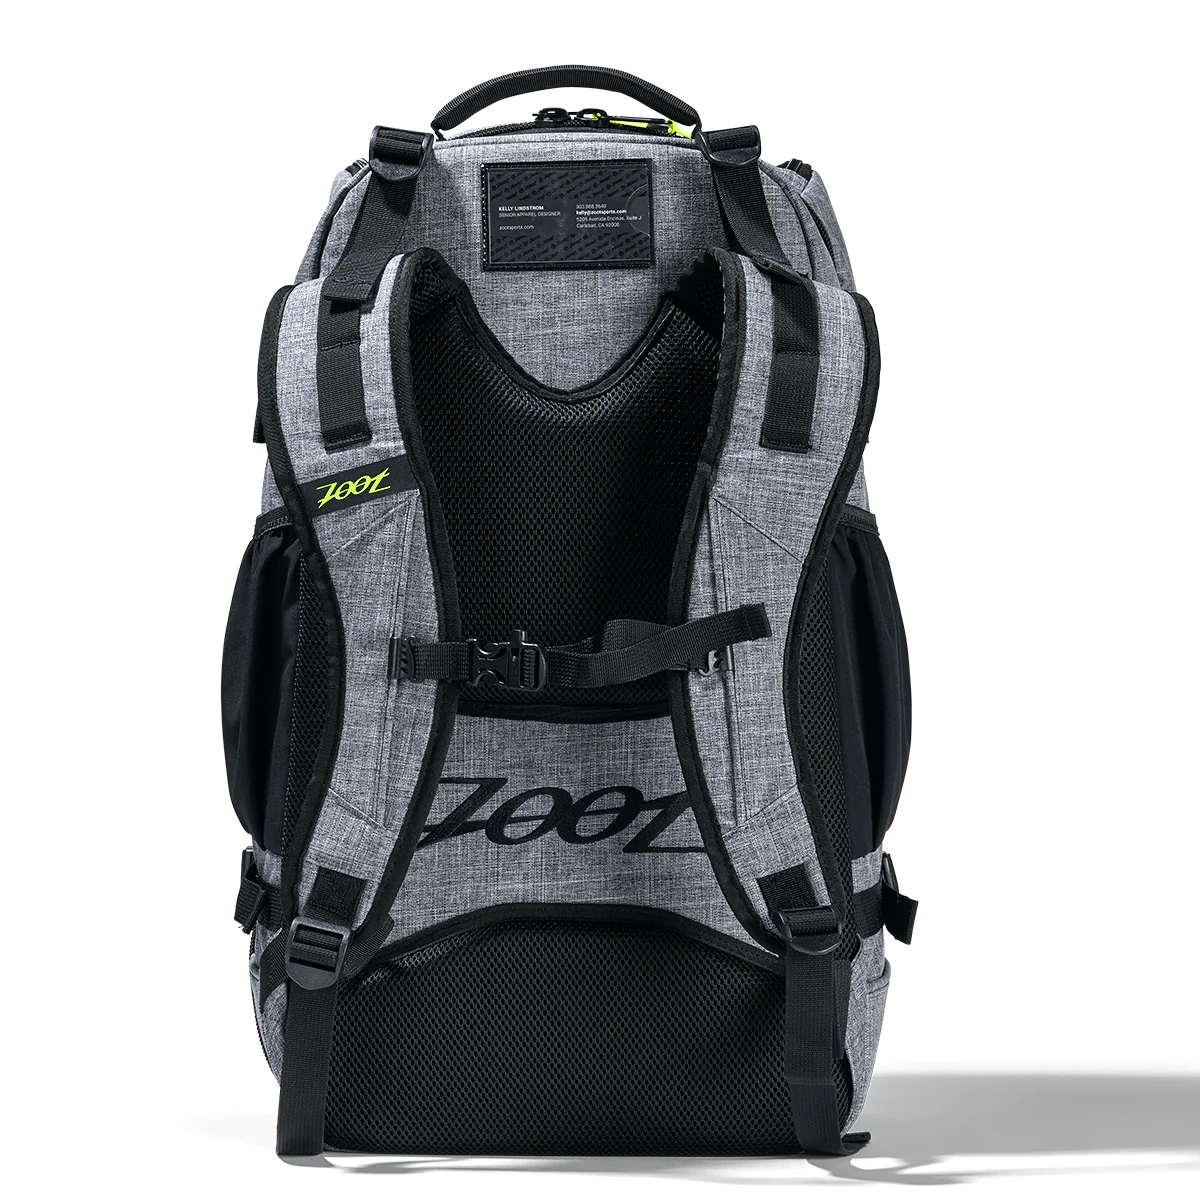 zoot-sports-bags-canvas-gray-new-ultra-tri-bag-canvas-gray